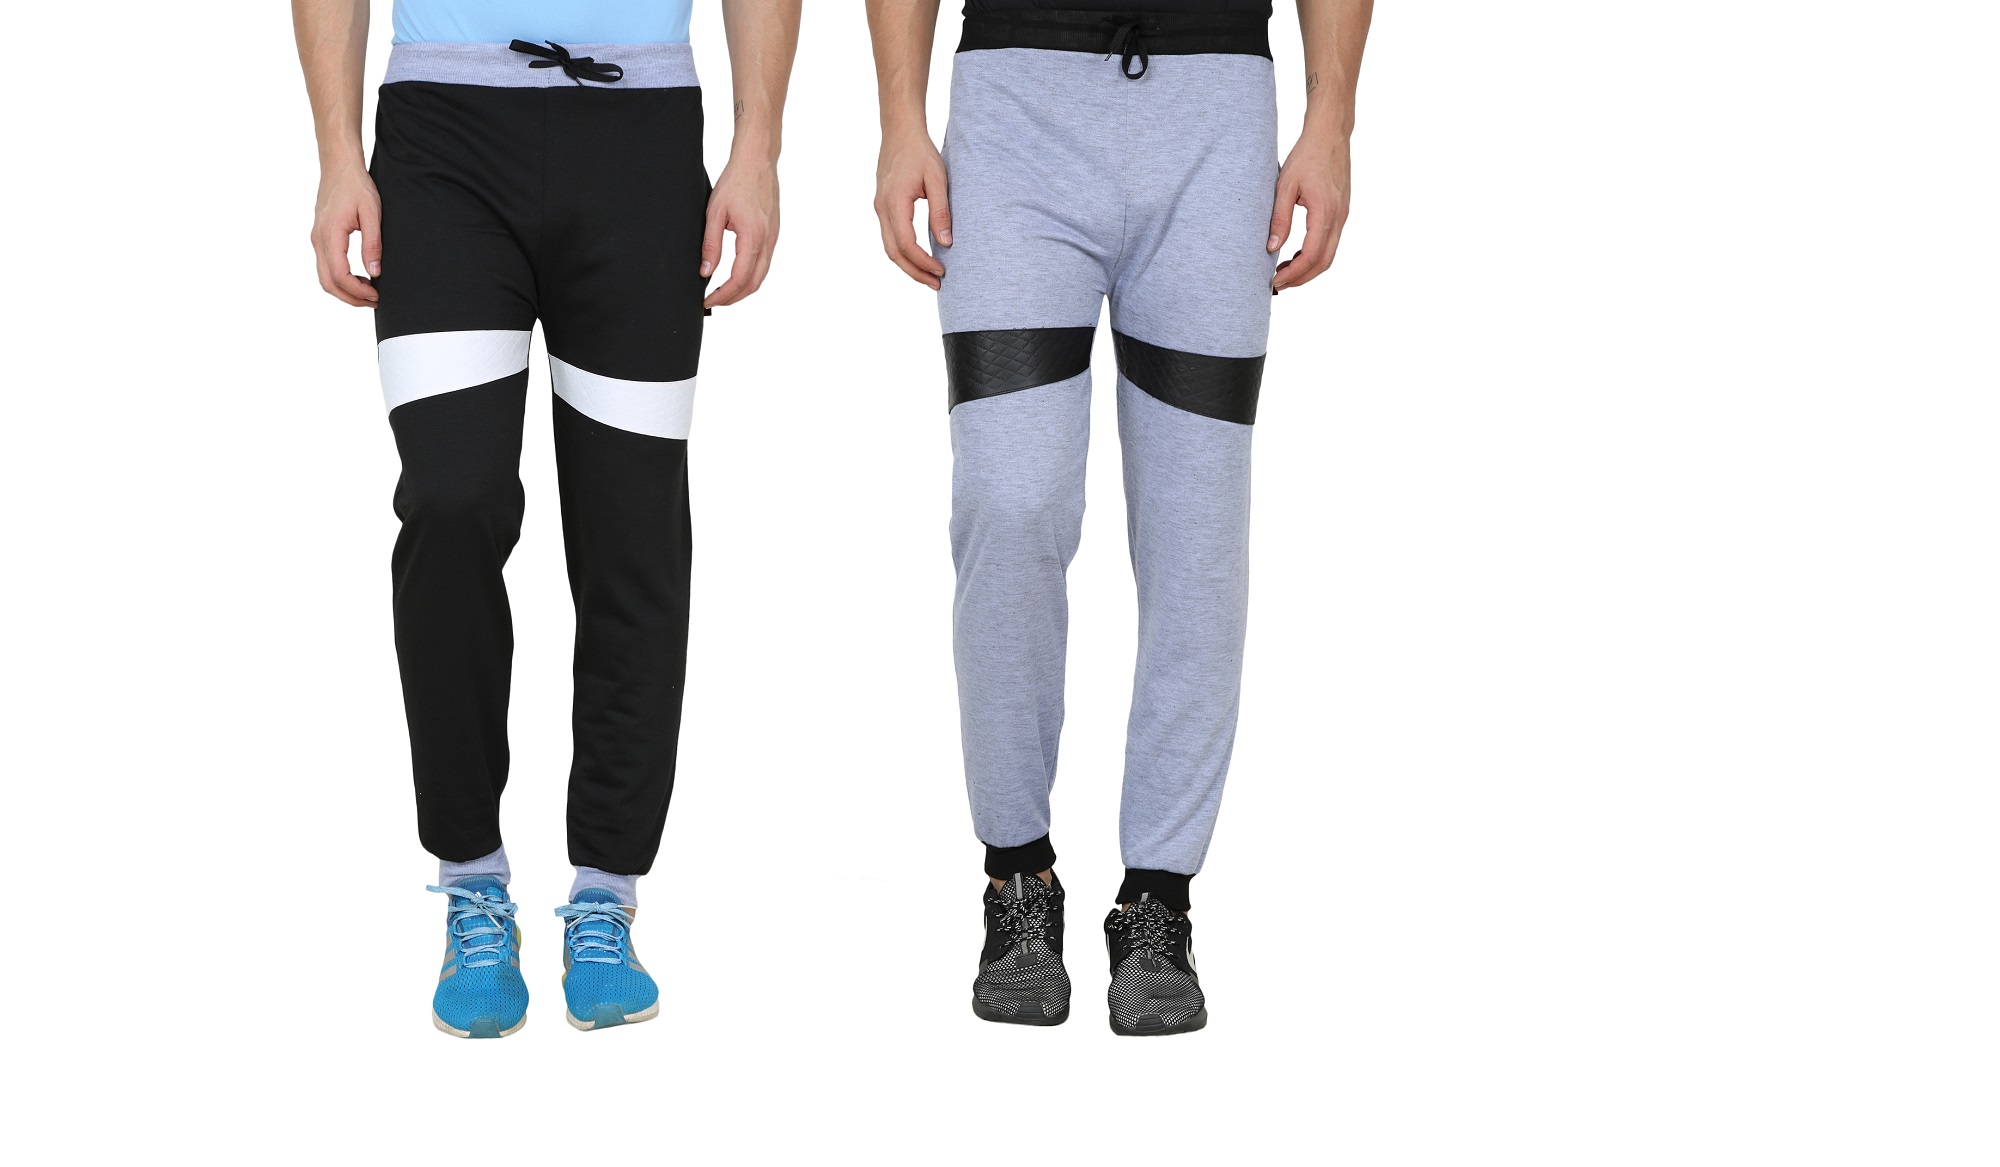 Buy Swaggy Solid Mens Track Pants Pack of 2 Online @ ₹599 from ShopClues